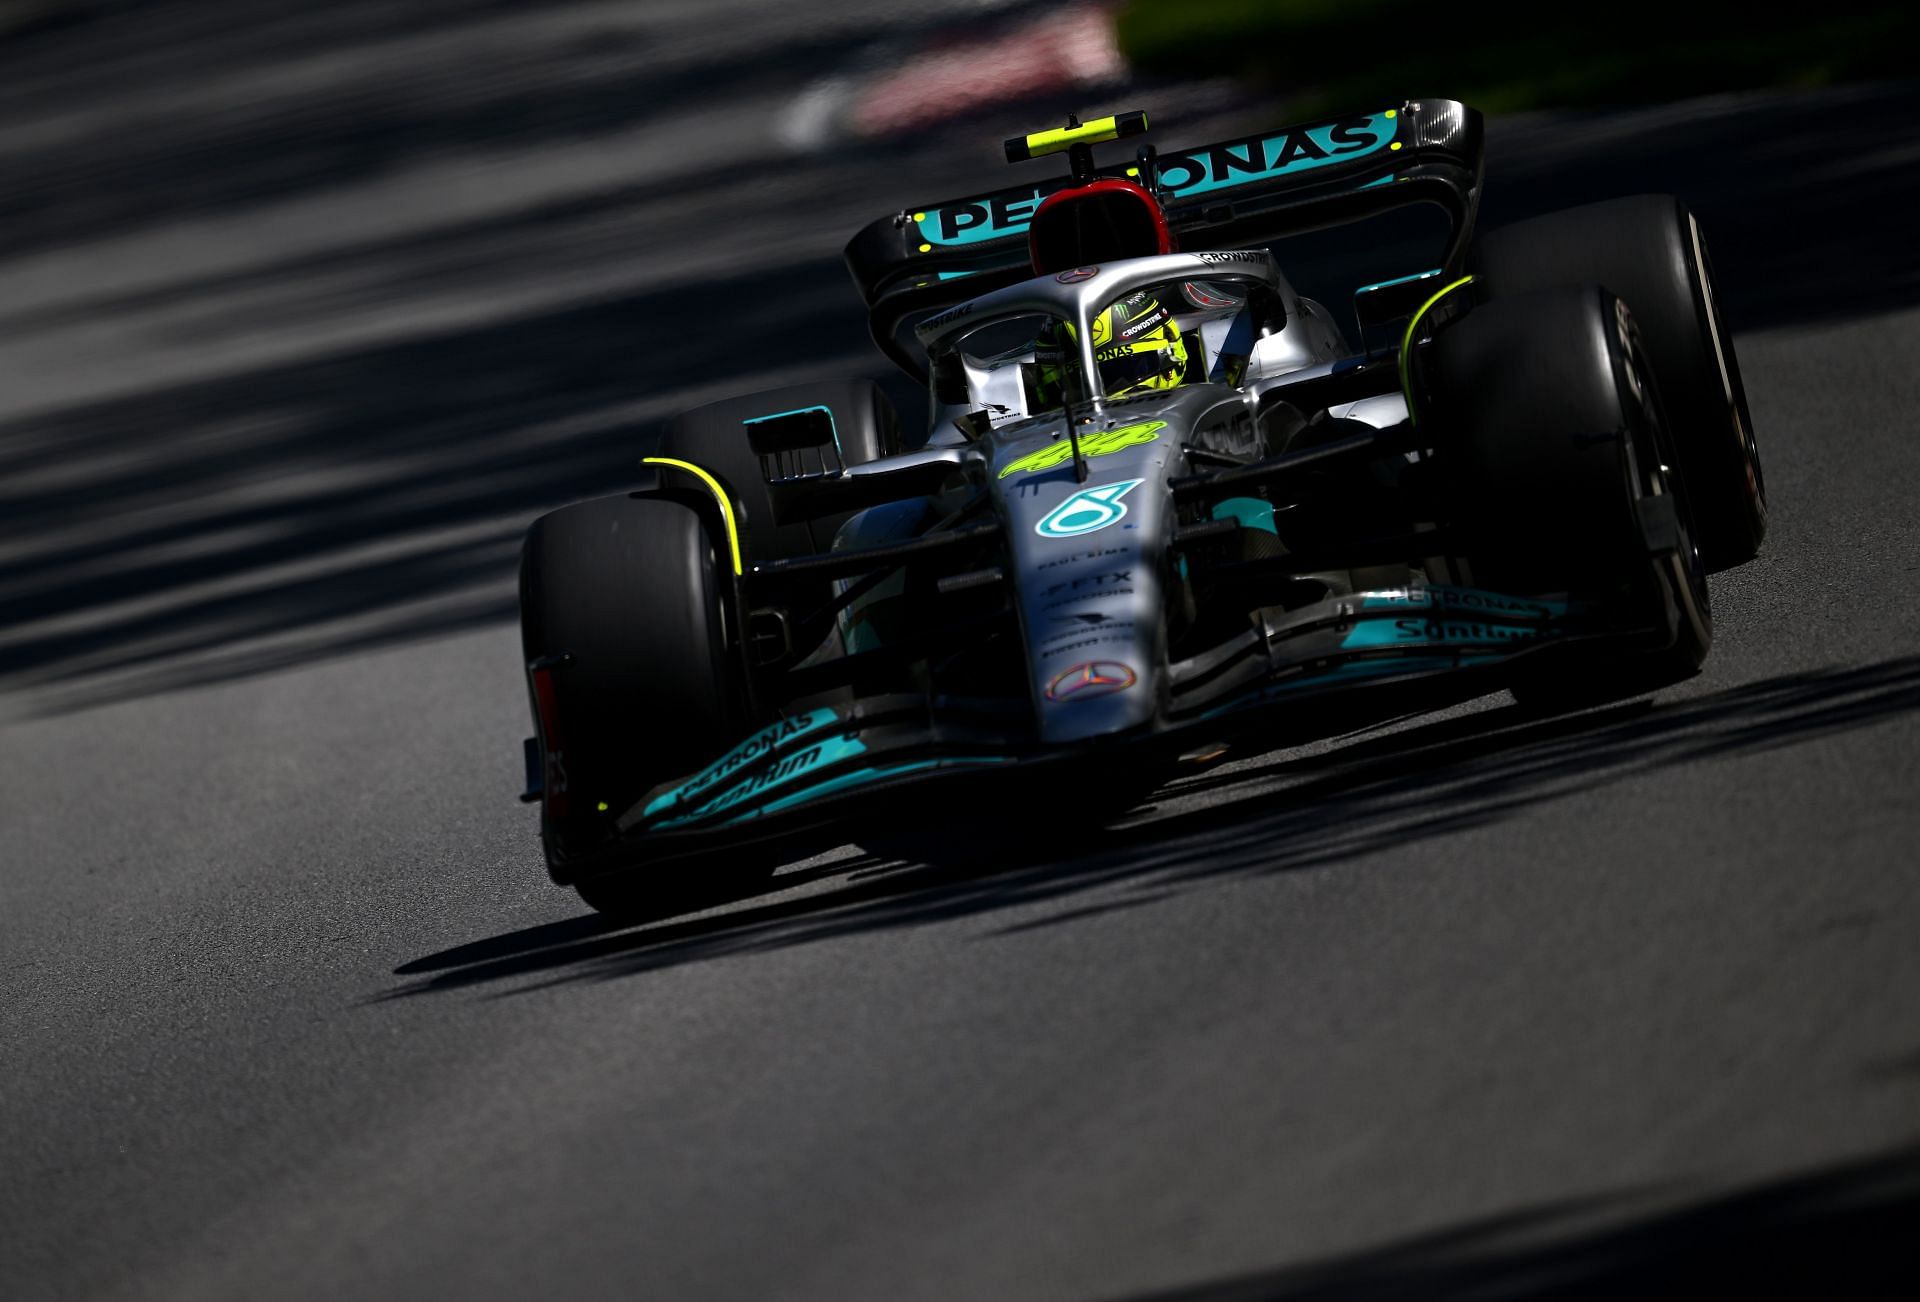 Mercedes does not expect to challenge for victory at the 2022 British GP